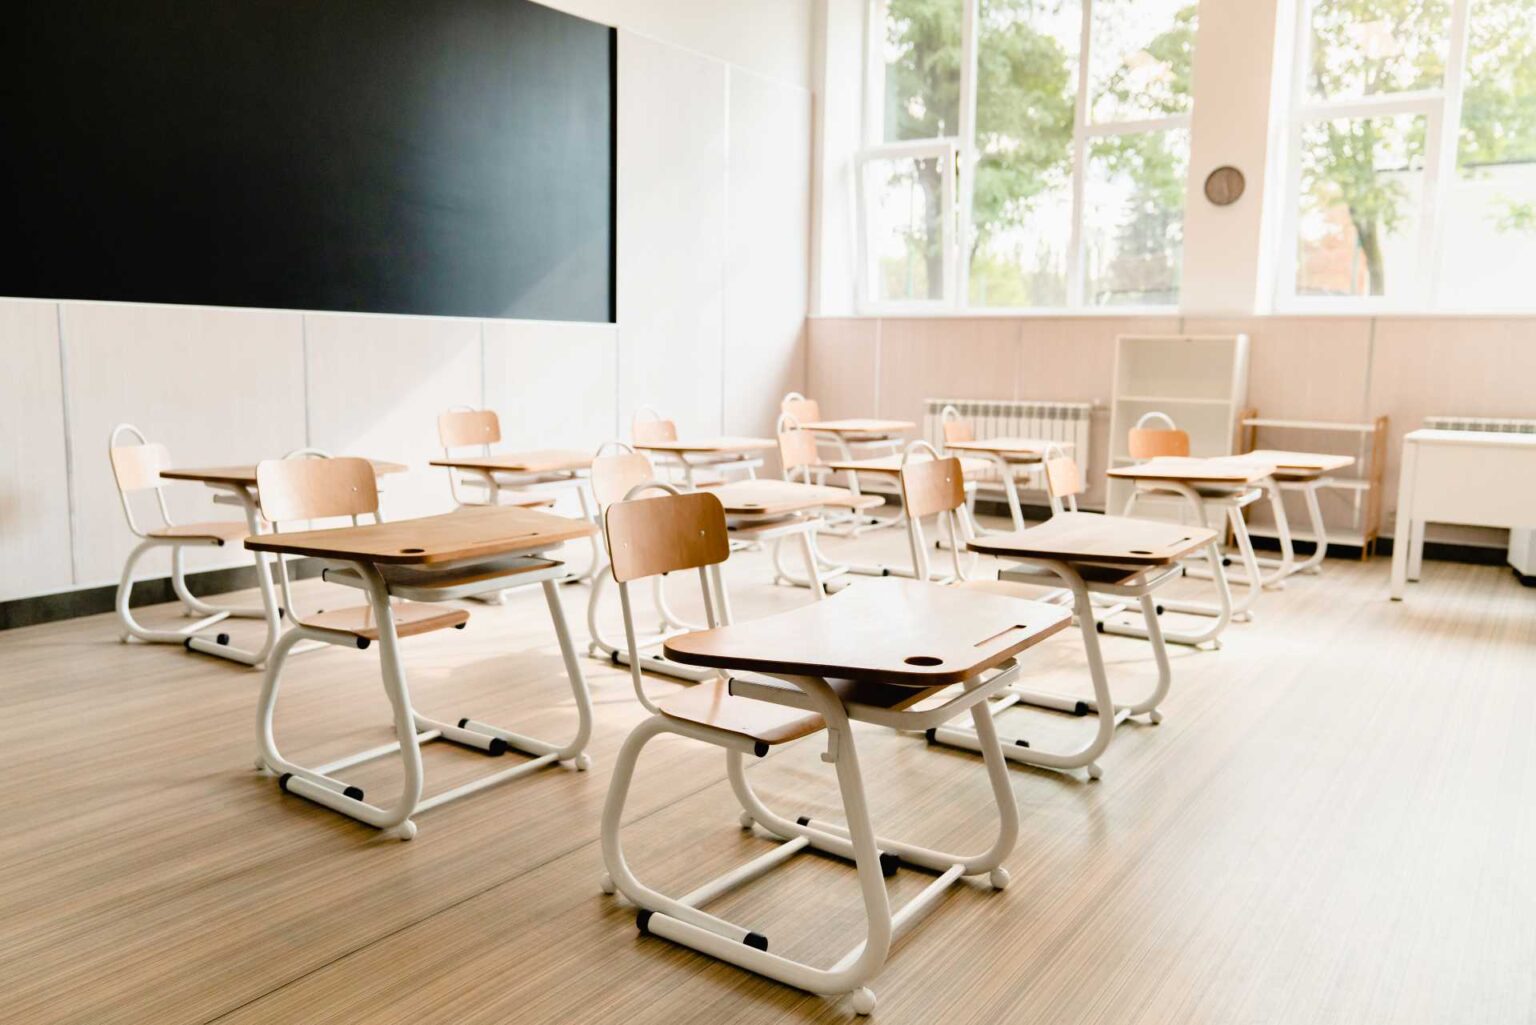 Modern empty classroom | Featured Image for the Commercial Cleaning Company Home Page of QCS Cleaning.